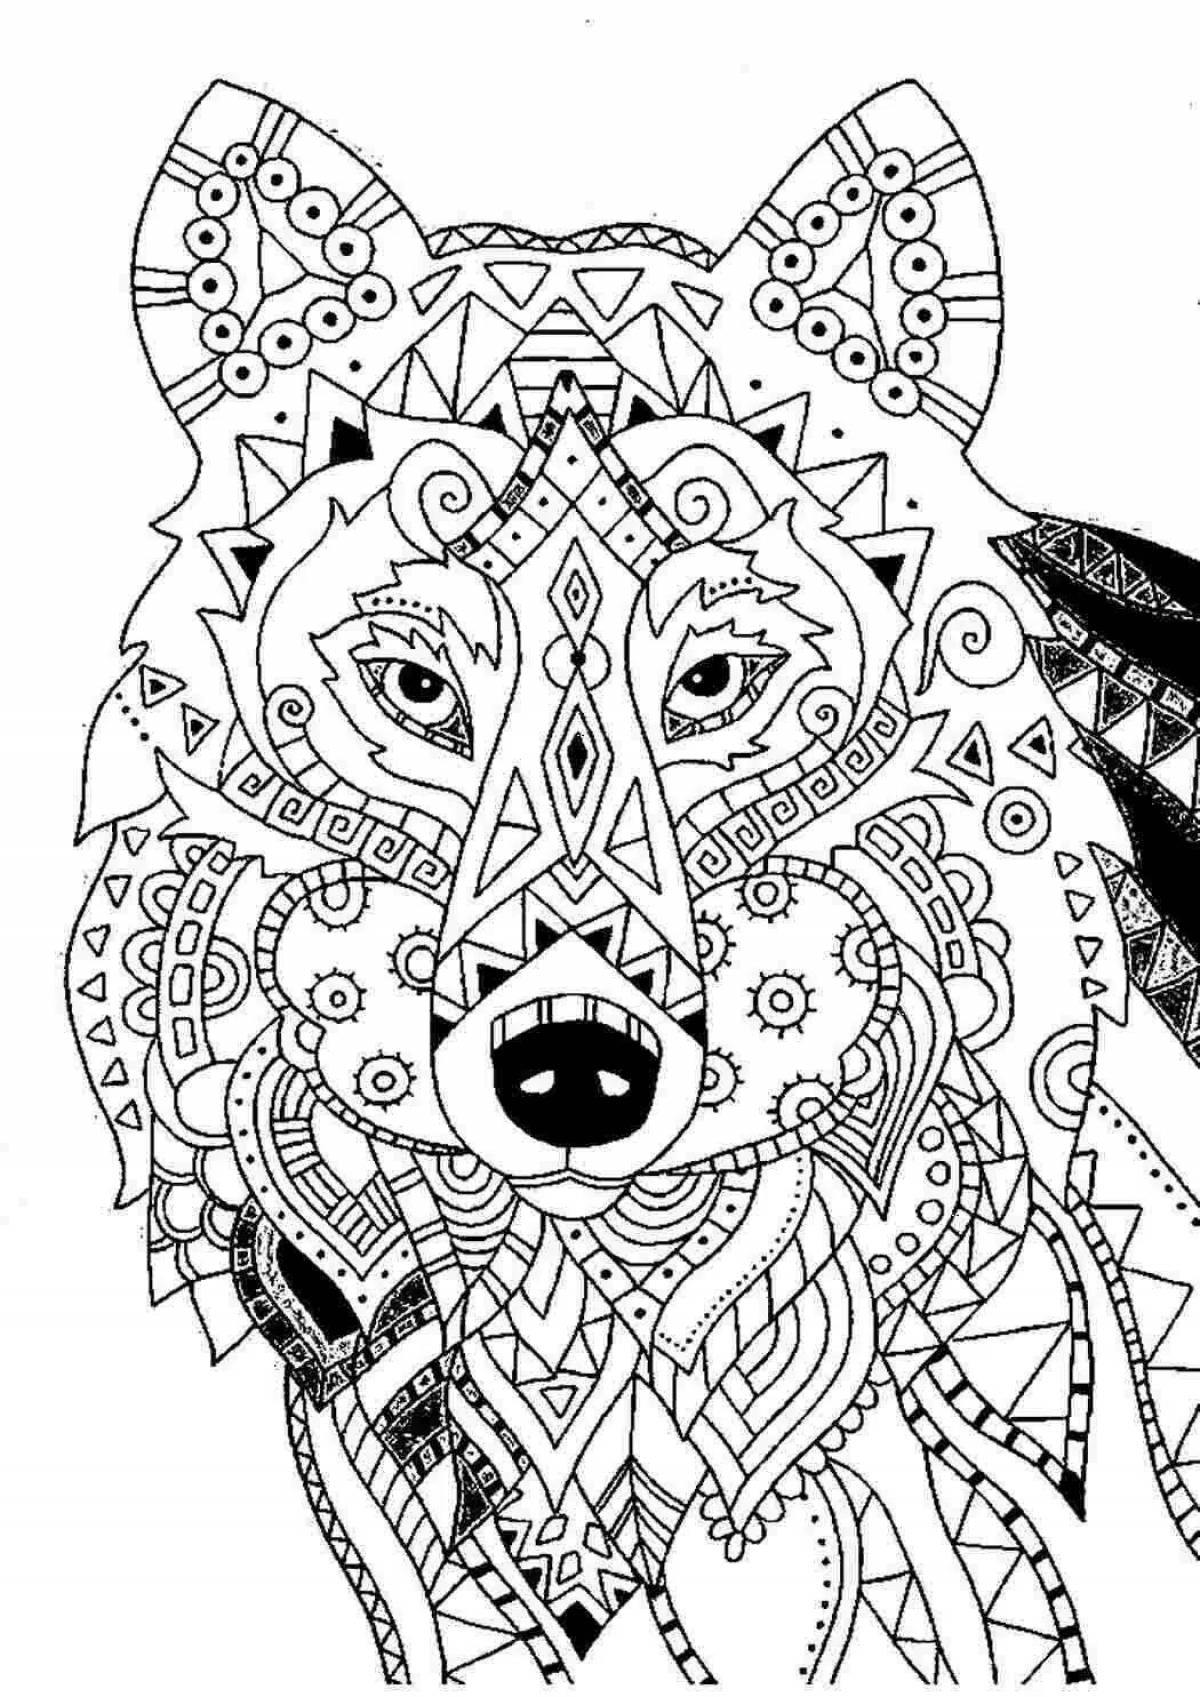 Colourful coloring book for children 10 years old